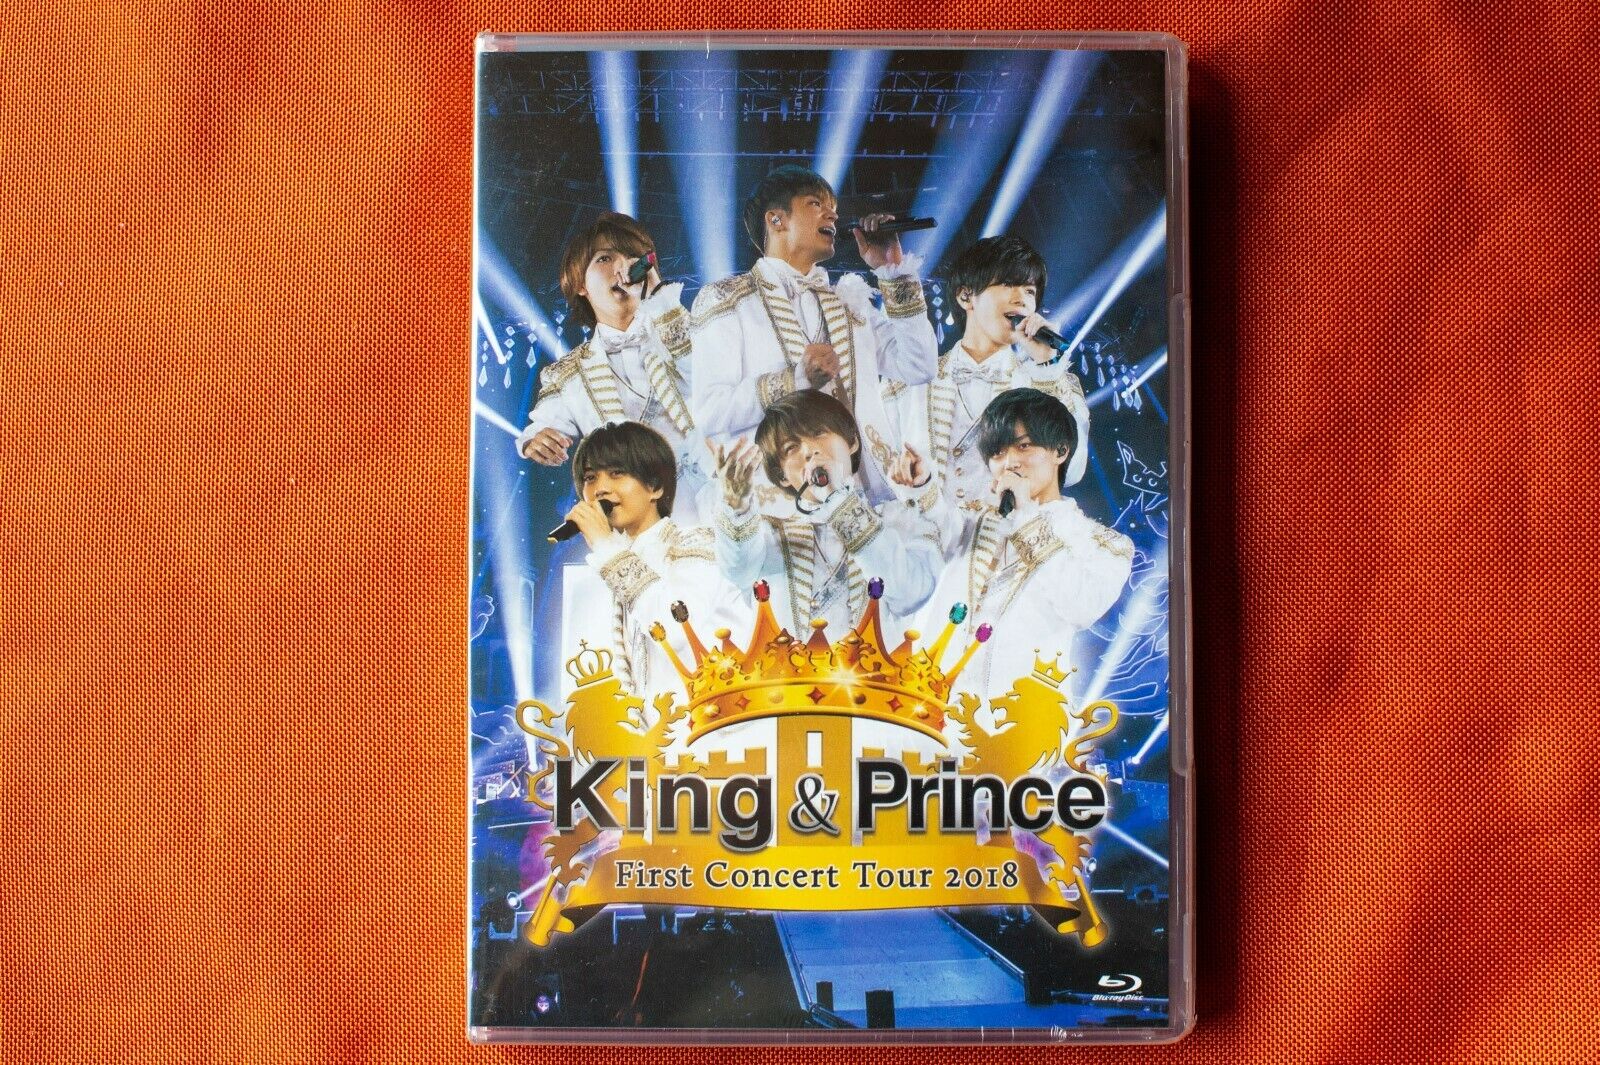 King & Prince First Concert Tour 2018 Normal Edition Blu-ray for 